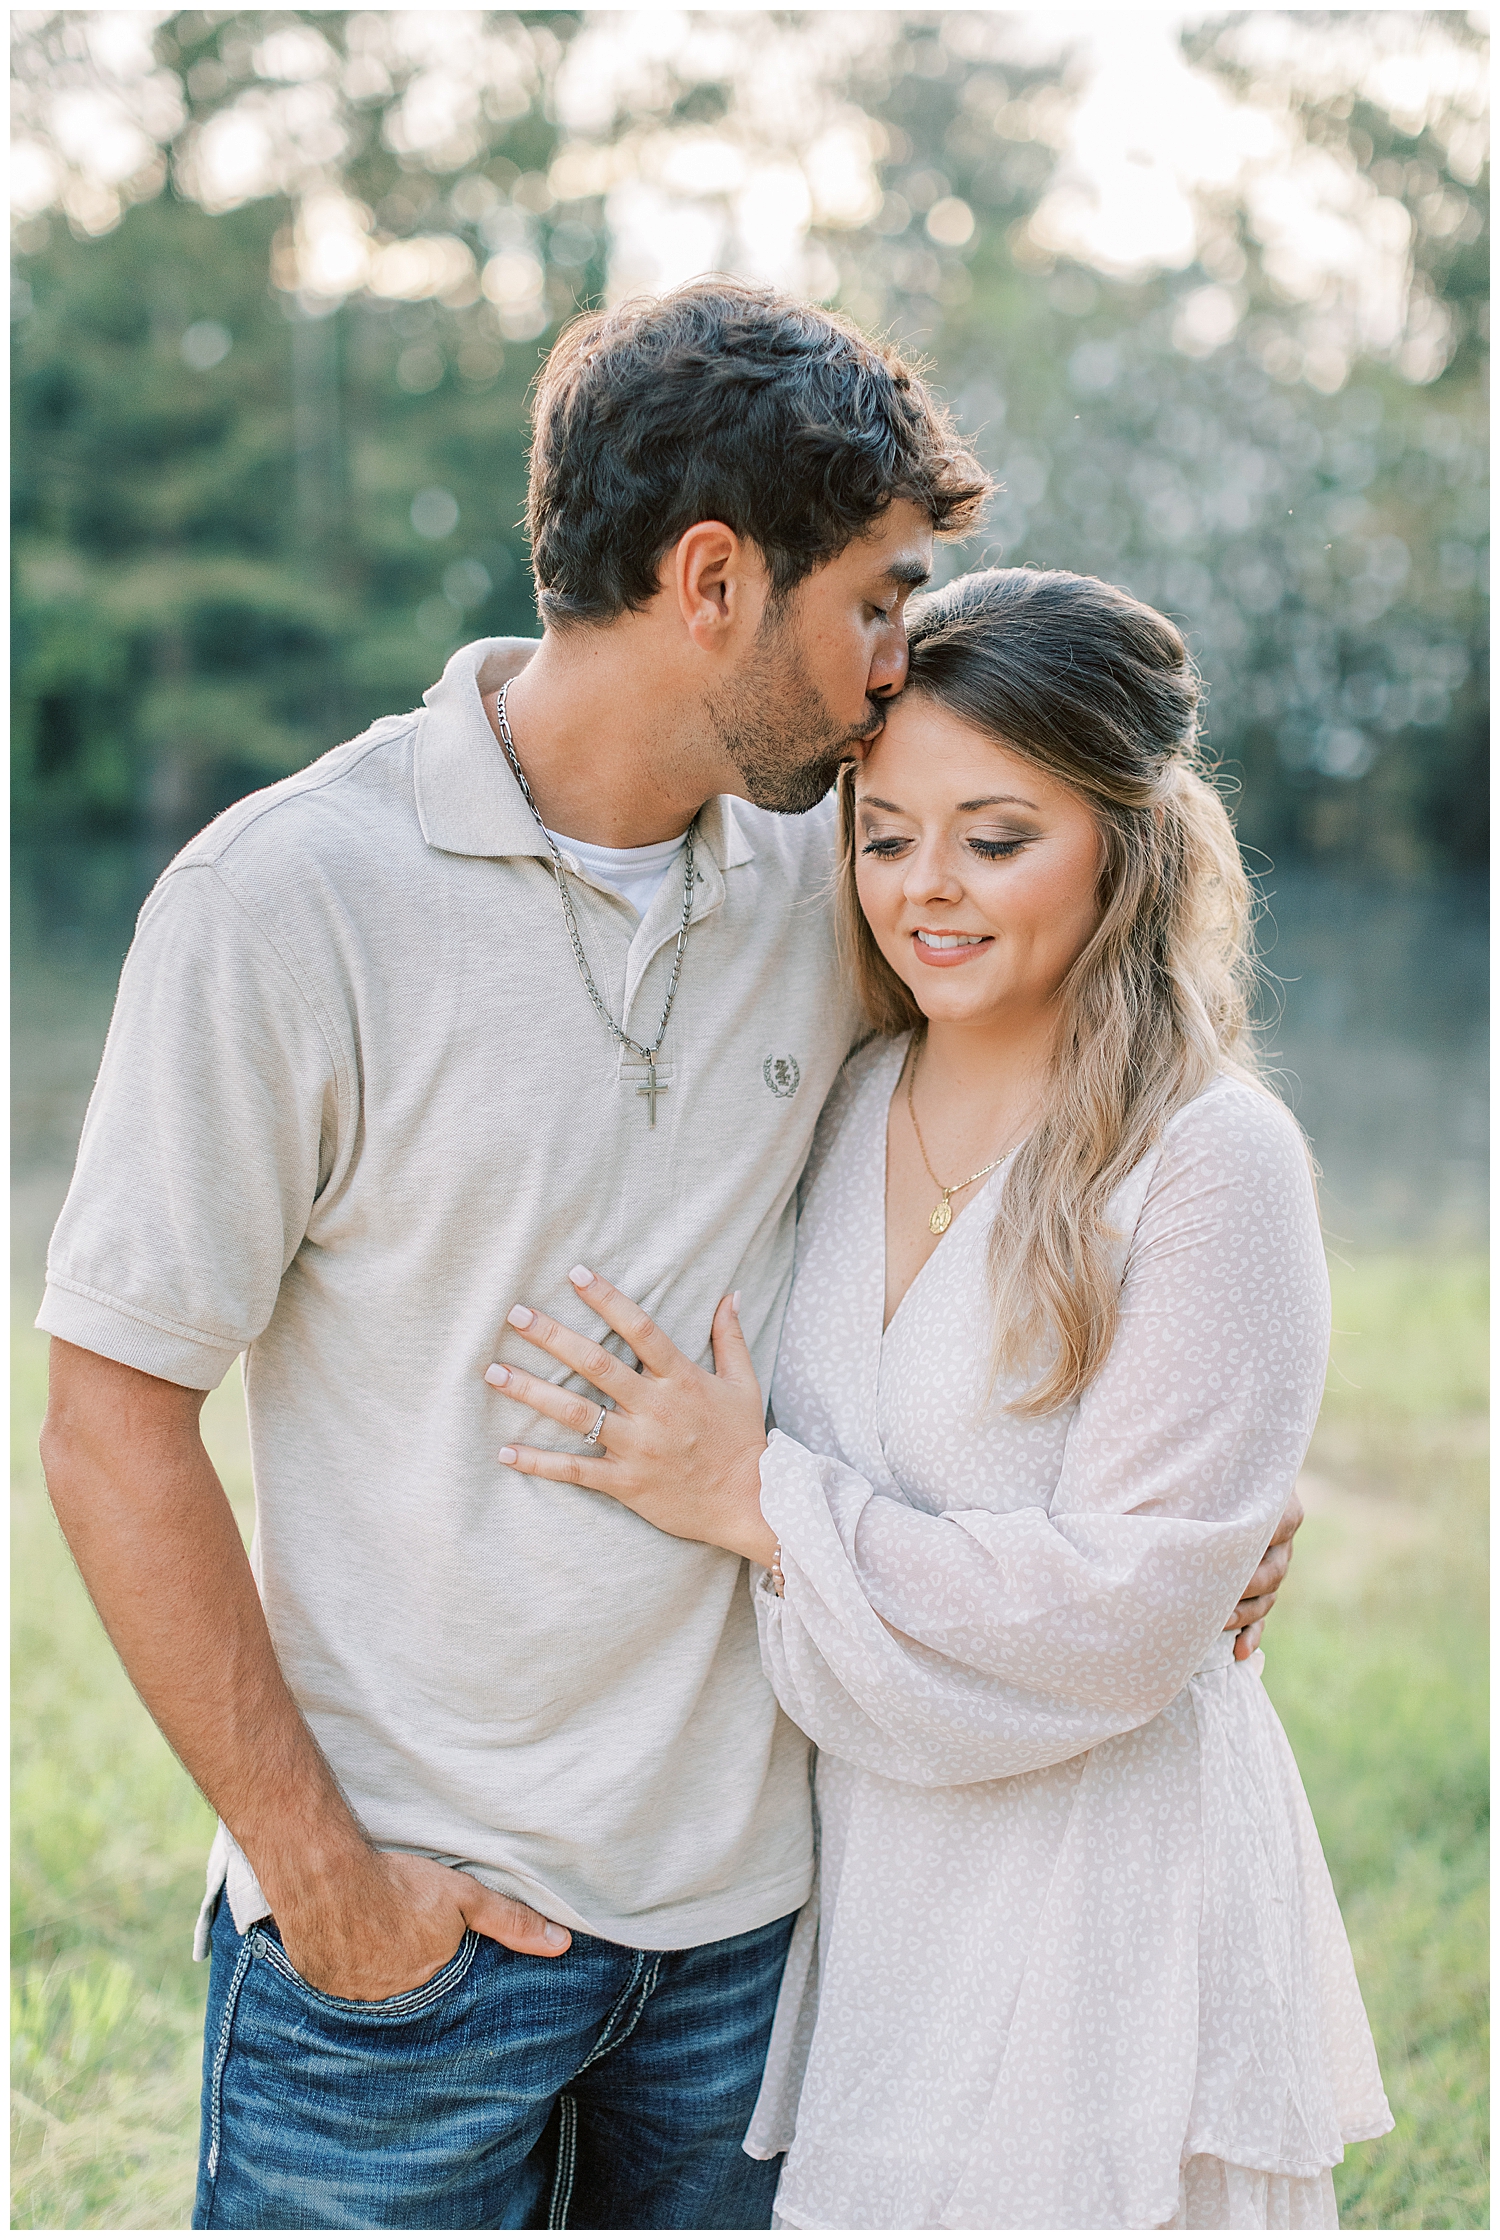 Juliann Riggs Photography captures a couple kissing in the summer engagement photos.